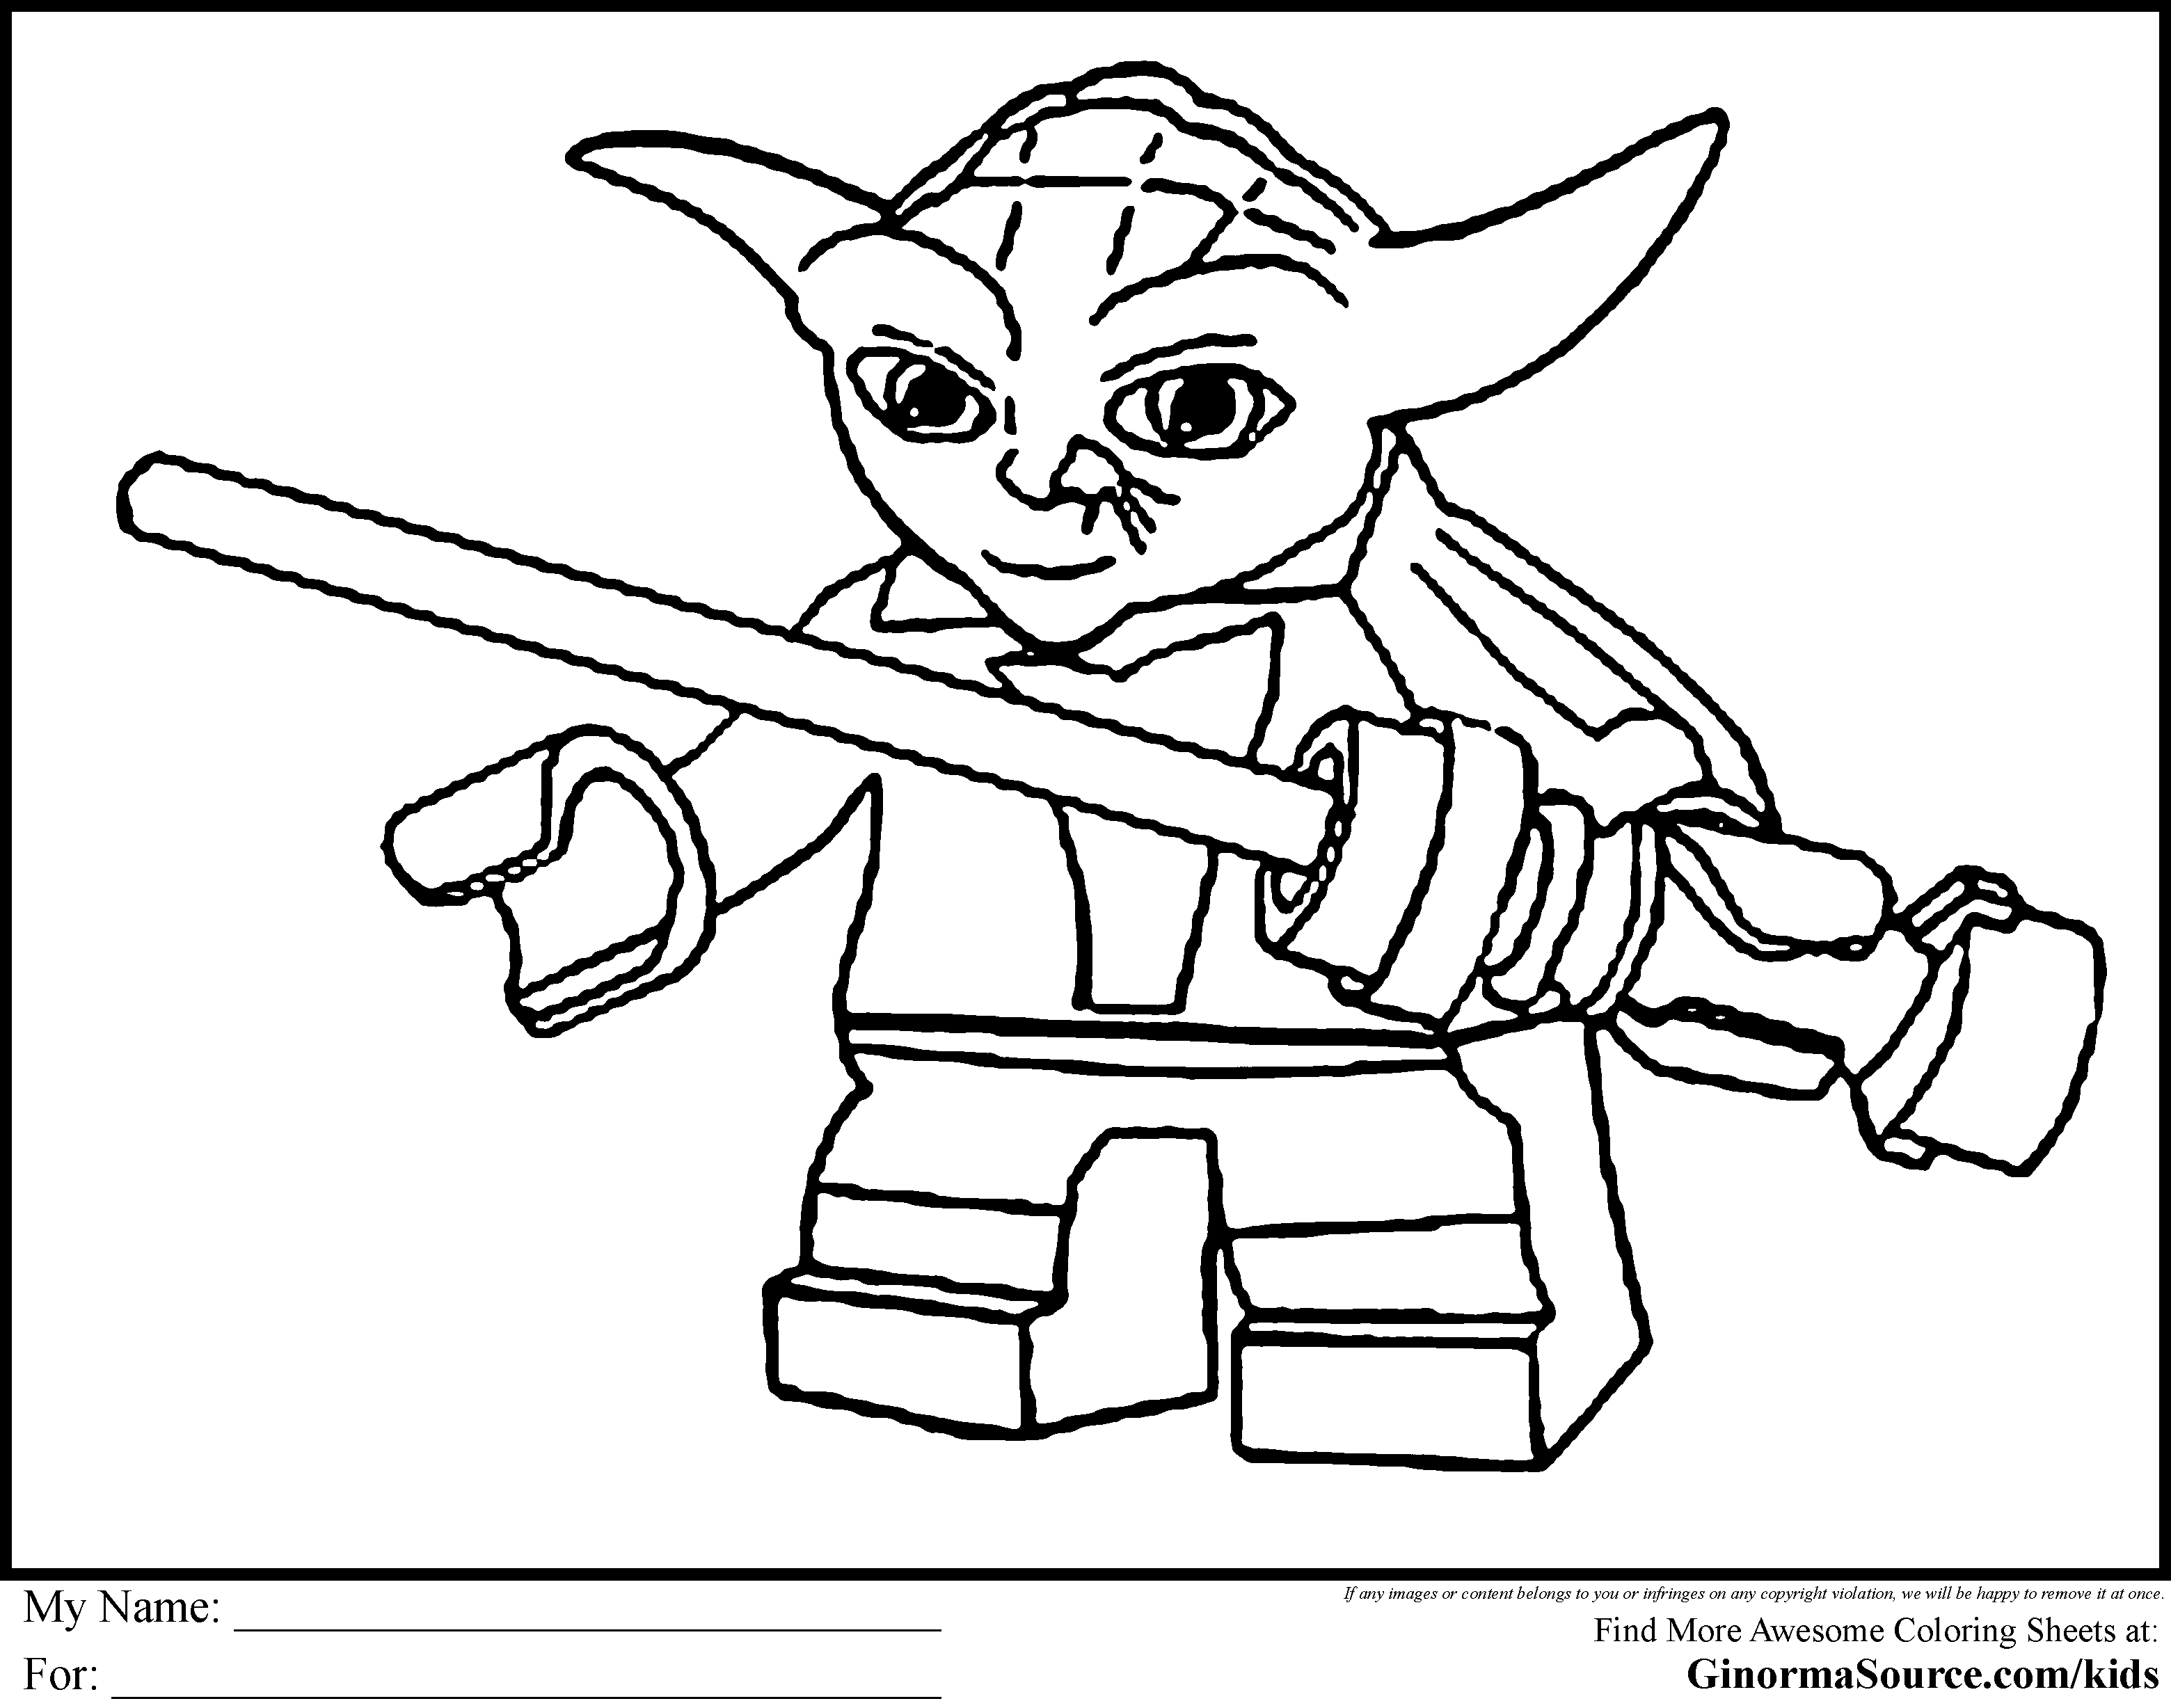 Lego Star Wars Colouring Games - High Quality Coloring Pages